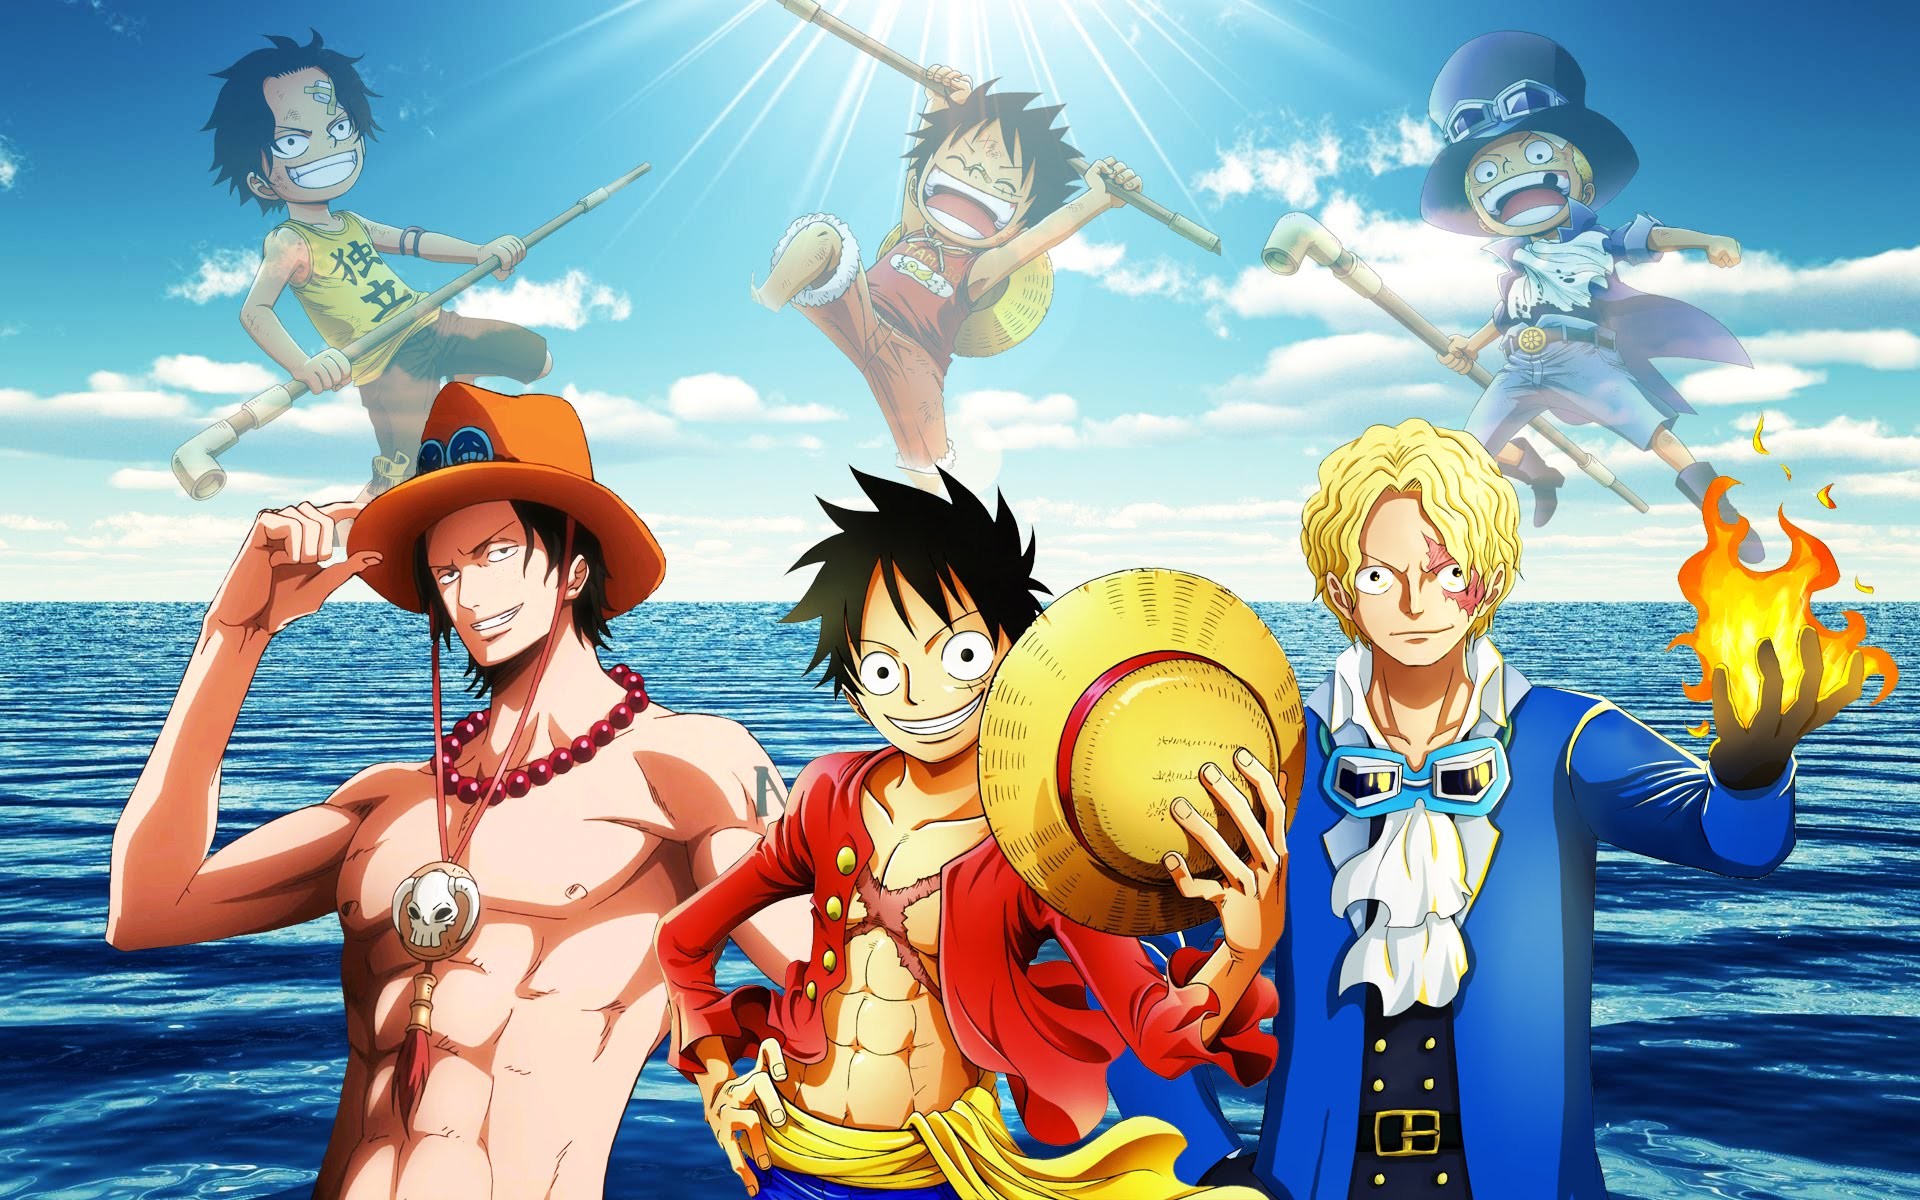 1920x1200 ... One Piece- Luffy,Sabo and Ace by Kagame-kun on DeviantArt ...